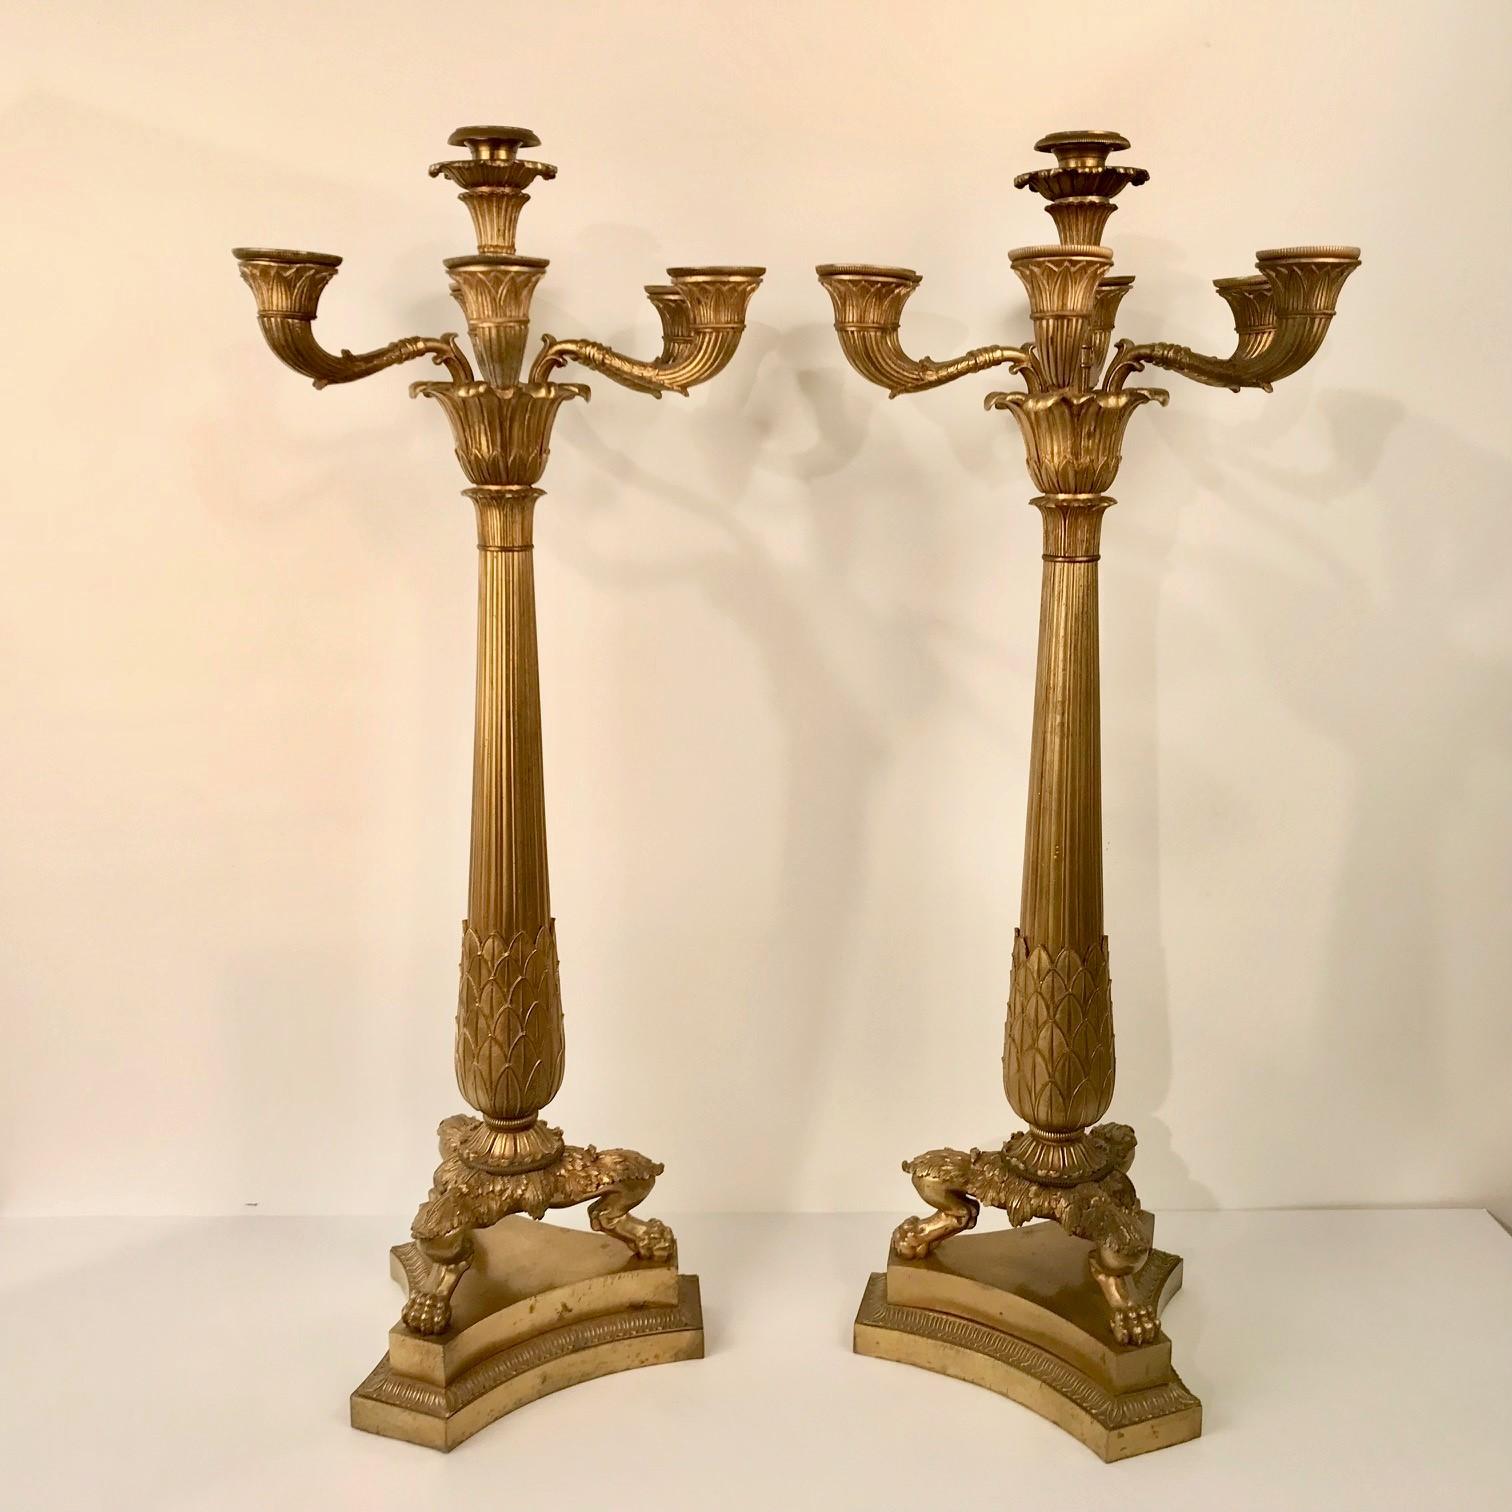 This noble pair are each raised on trefoil bases, supporting three stylised animal paw feet, the tapering cylindrical column is reeded with capital and base decorated with acanthus, a double motif continued by the five arms around a central